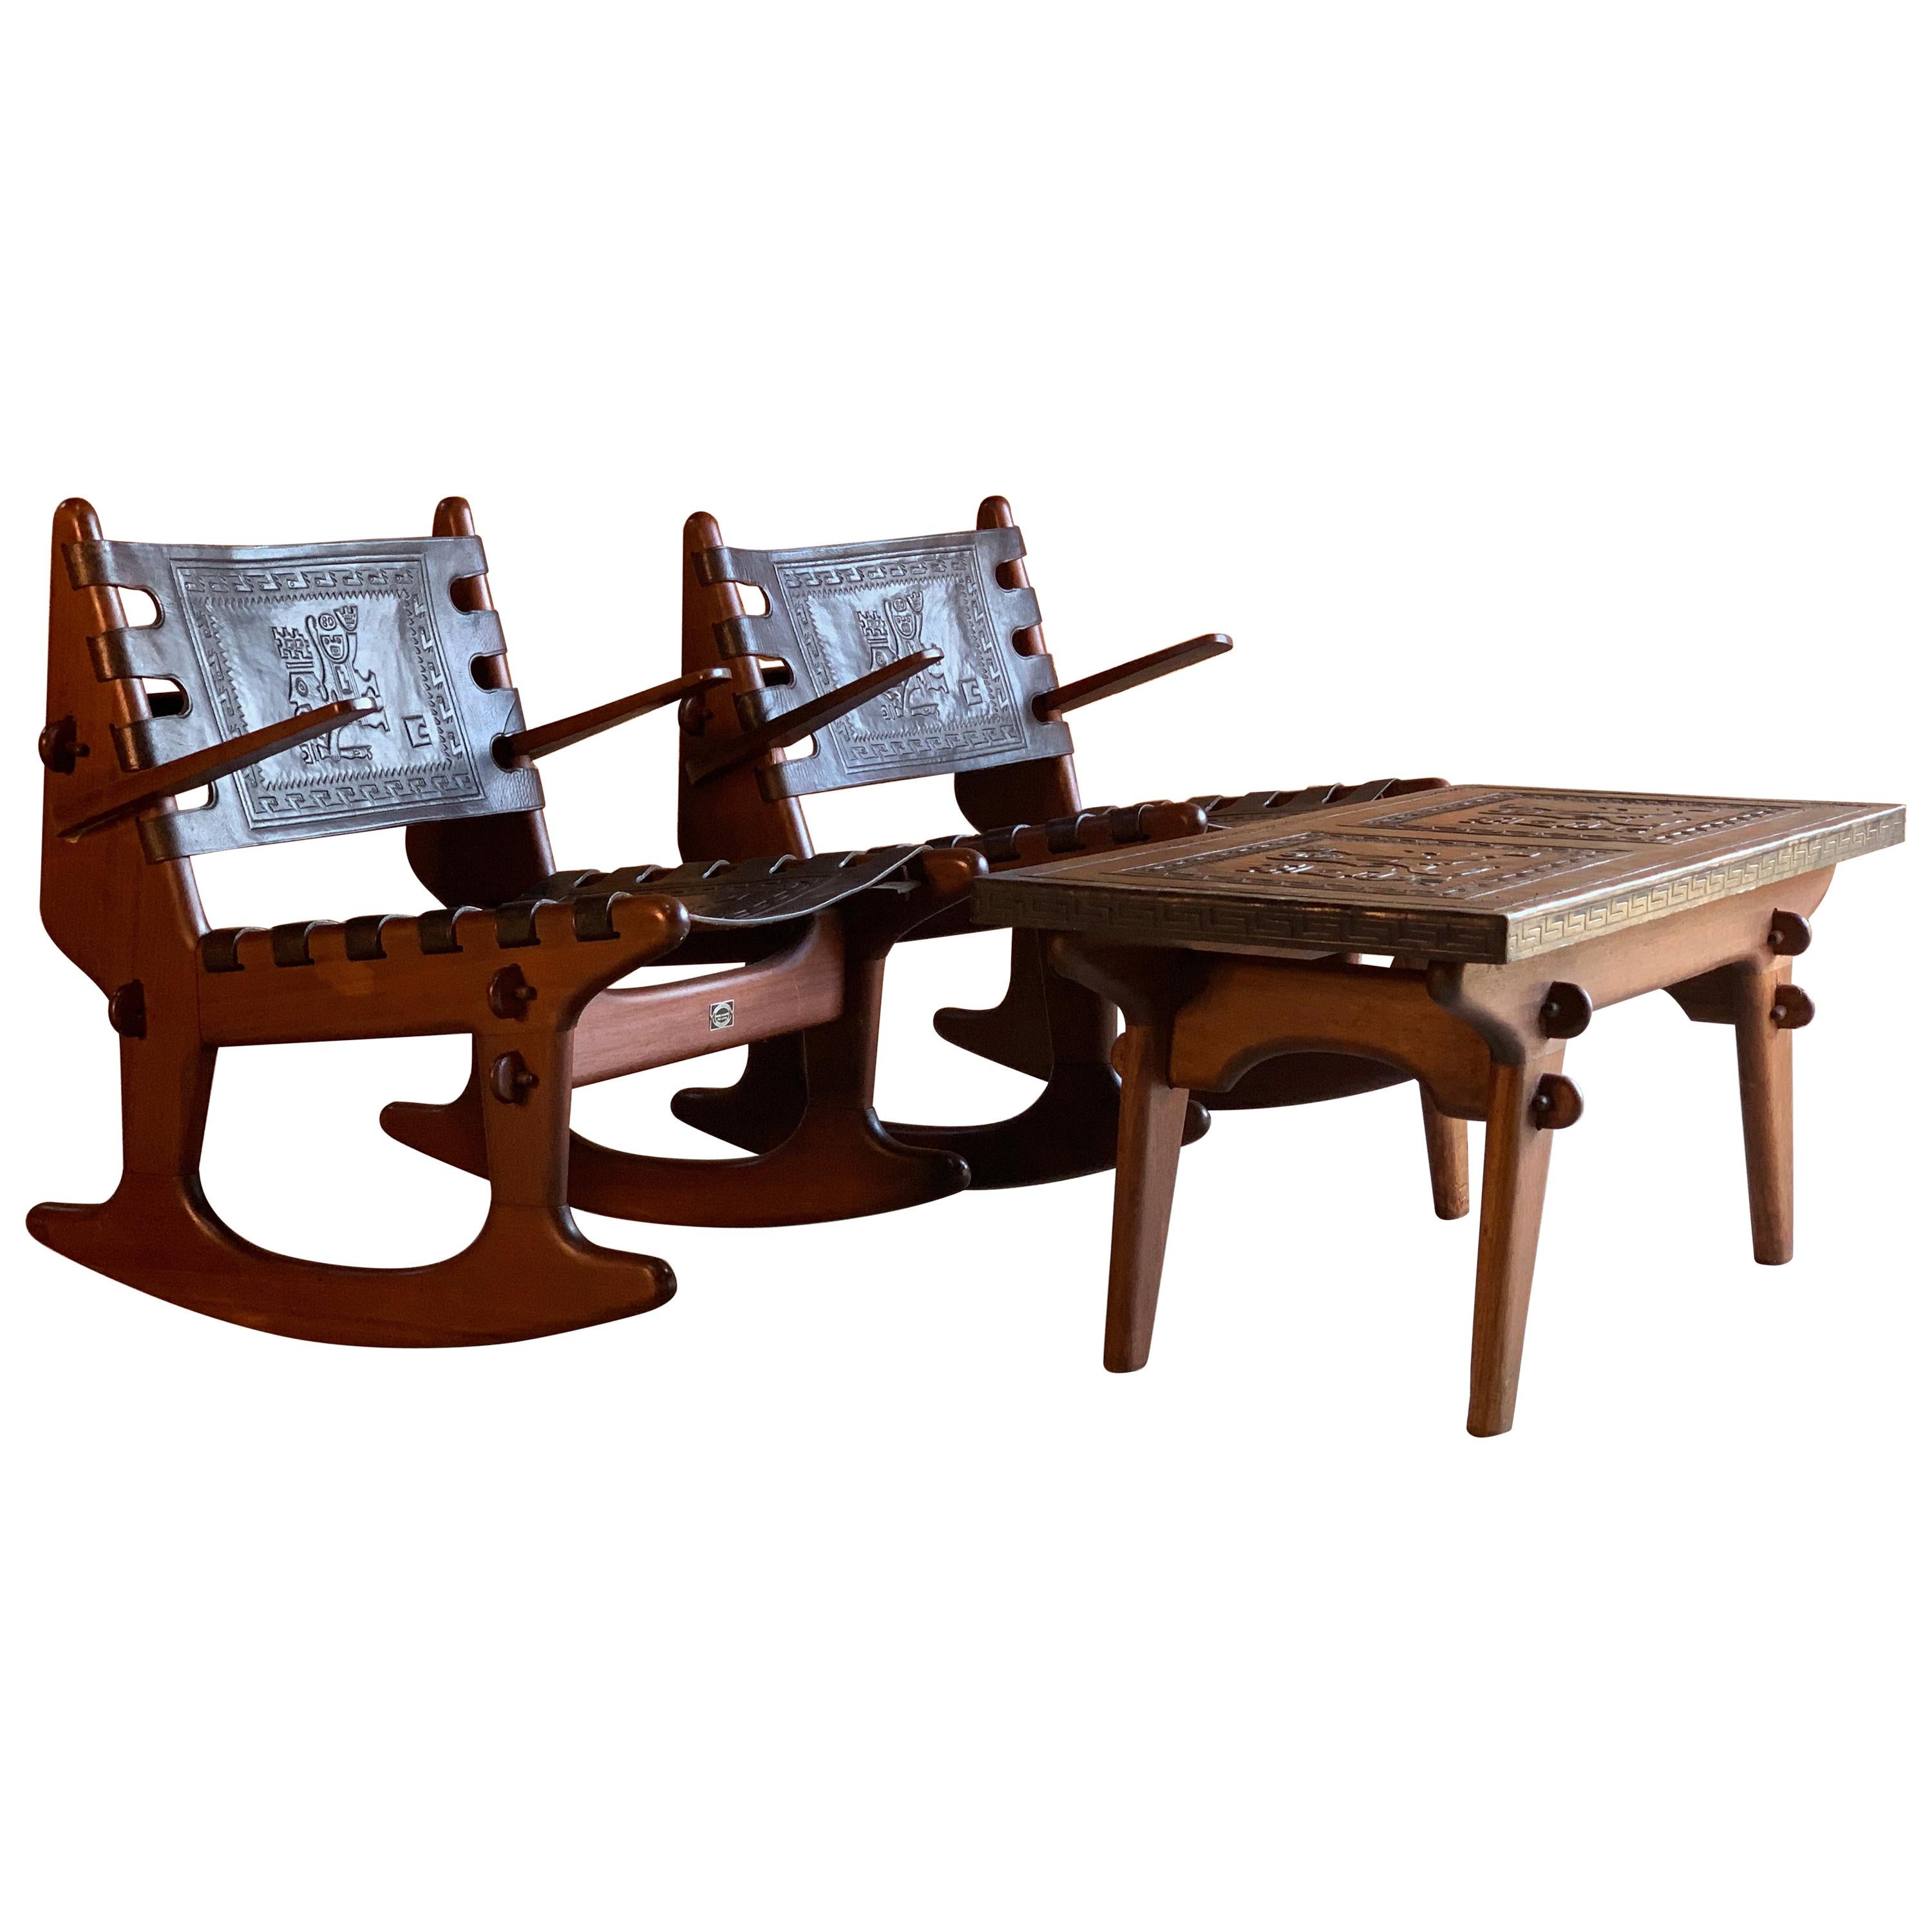 Angel Pazmino rocking chairs and coffee table teak and leather Ecuador, 1960

Extremely rare mid-20th century South American coffee table and matching rocking chairs, designed by Angel Pazmino, the rocking chairs with solid teak frames, peg